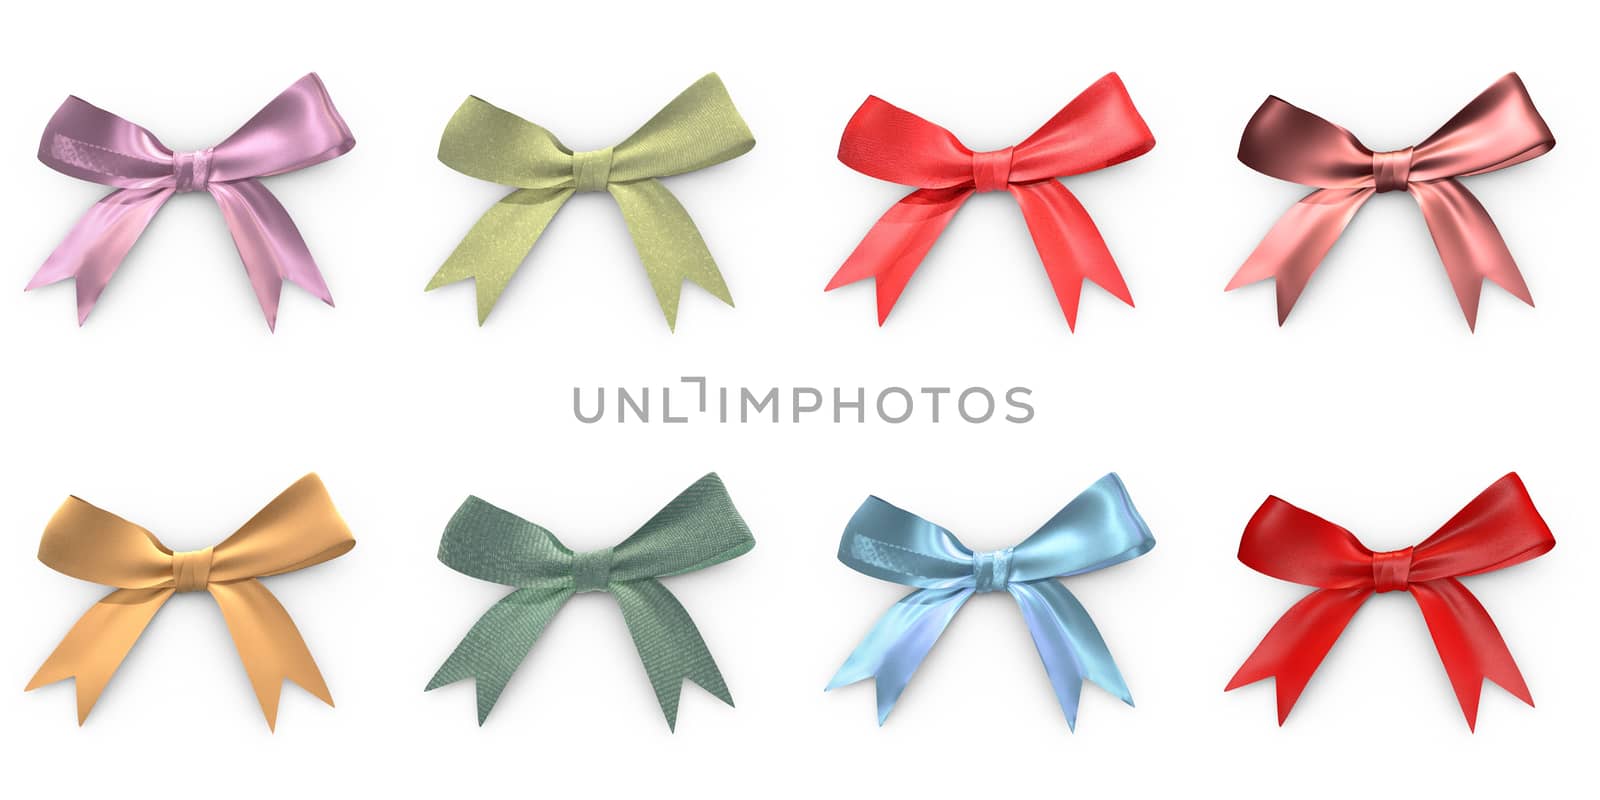 Eight Christmas ribbons with different materials